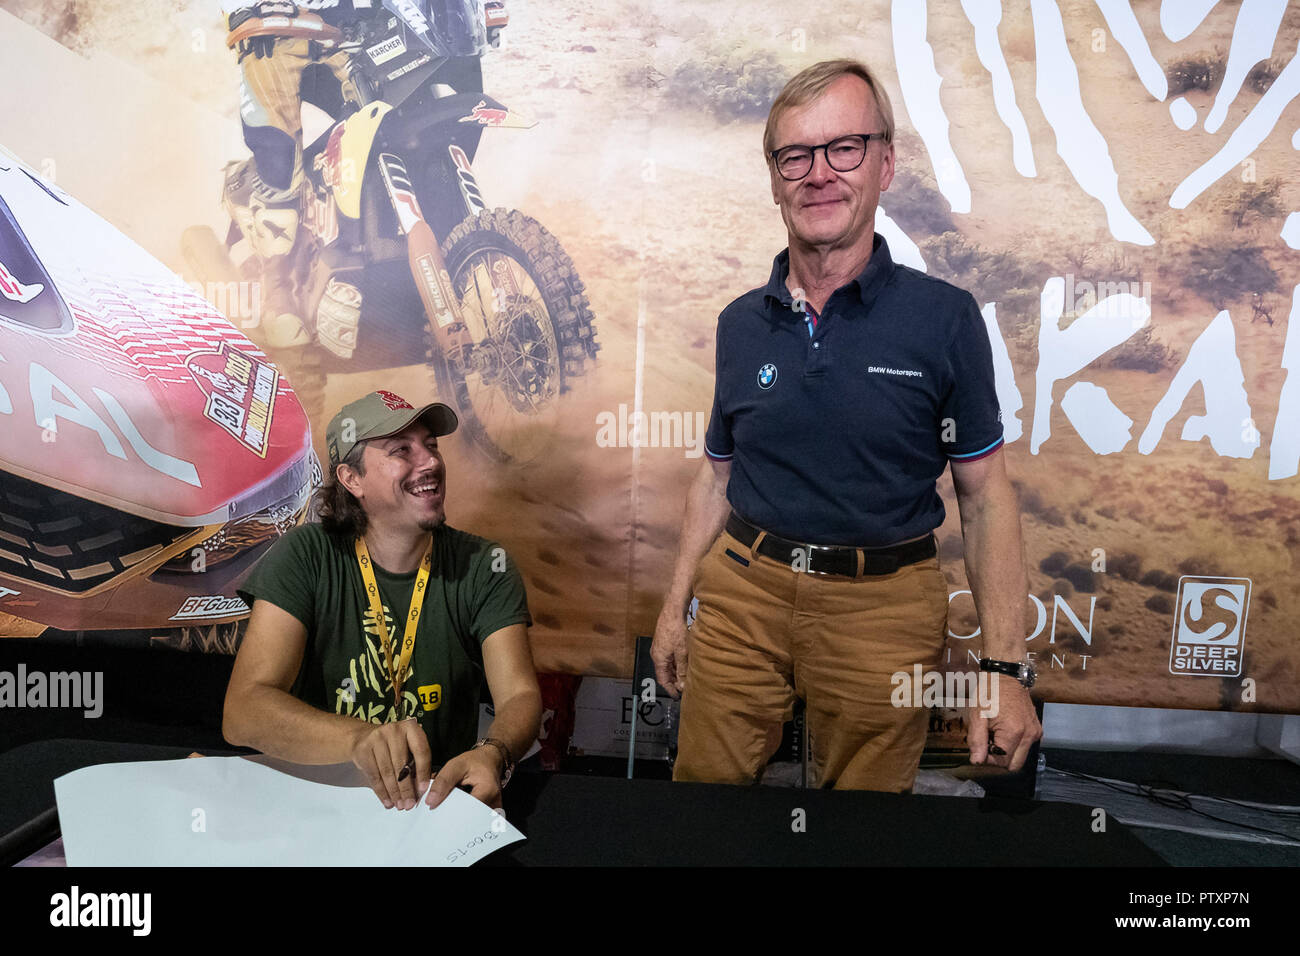 Alges, PORTUGAL: Ari Vatanen testing the portuguese game Dakar18 with Paulo Gomes CEO and Director of Bigmoon Entertainment on 4th and last day of Comic Con Portugal 2018 in Passeio Maritimo de Alges in Alges, Sunday, Sep. 9, 2018. Due to be released on Sep. 11 on PlayStation 4, Xbox One, Microsoft Windows  Featuring: Ari Vatanen, Paulo Gomes Where: Algés, Oeiras, Portugal When: 09 Sep 2018 Credit: Rui M Leal/WENN.com Stock Photo